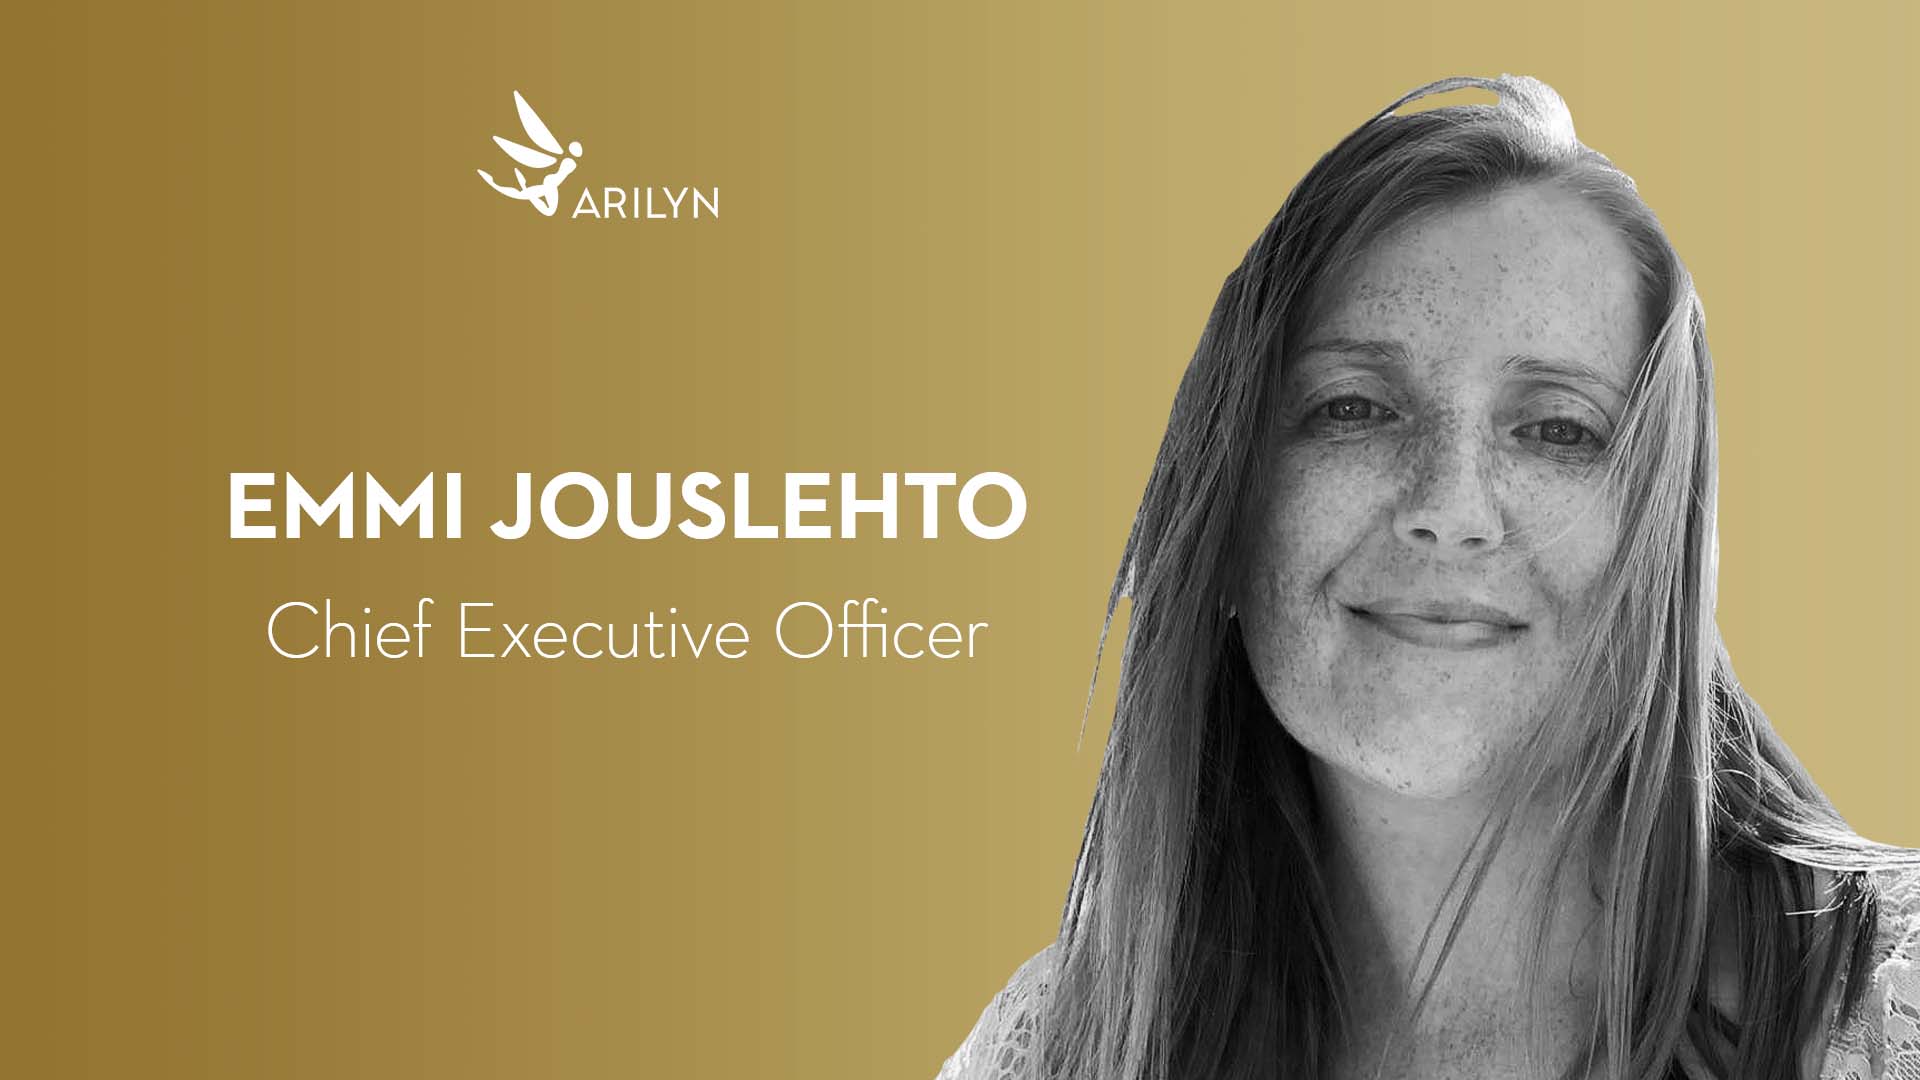 Get to know Arilyn – Emmi, CEO